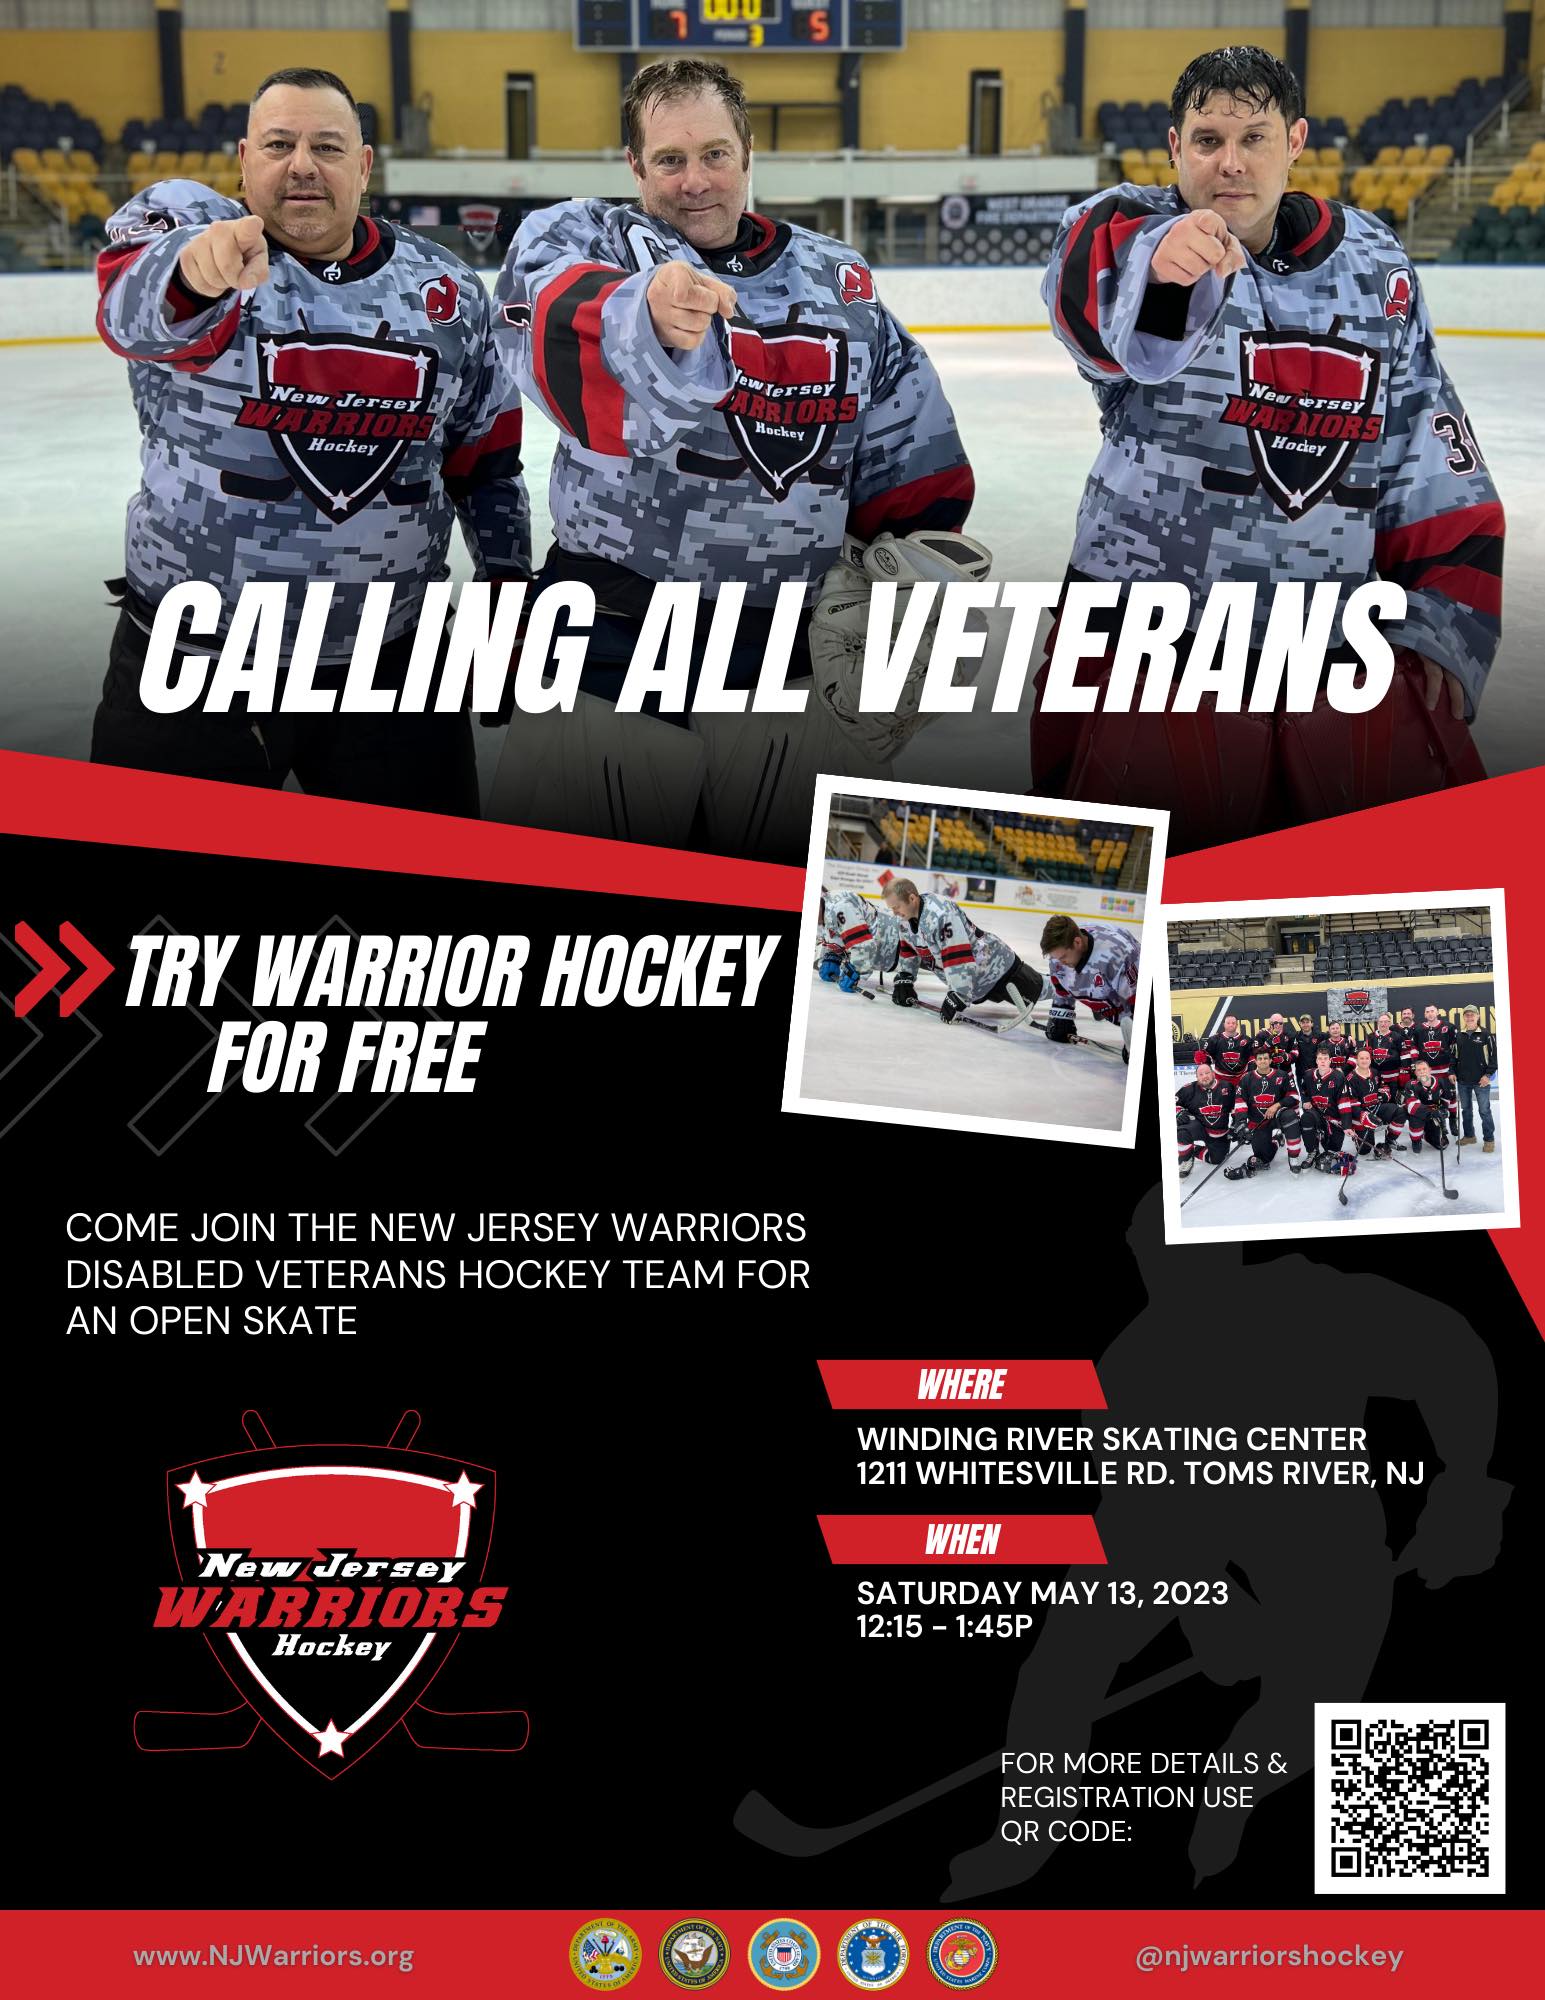 The NJ Warriors Hockey are looking for veterans in the NJ area who are interested in joining our team!